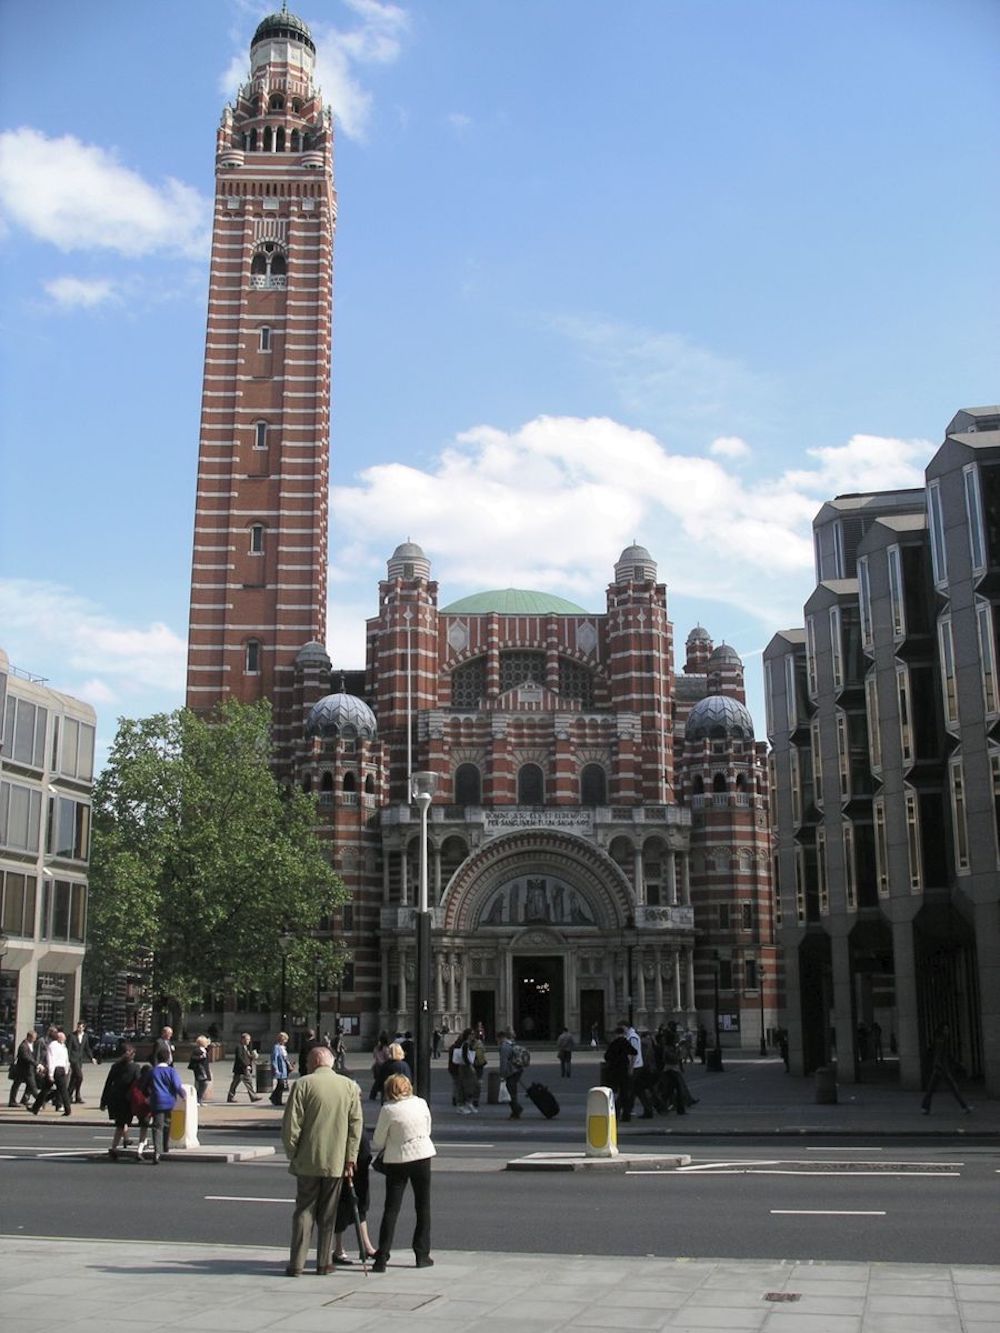 Front of Westminster Cathedral in London. Photo Credit: © Public Domain via Wikimedia Commons.